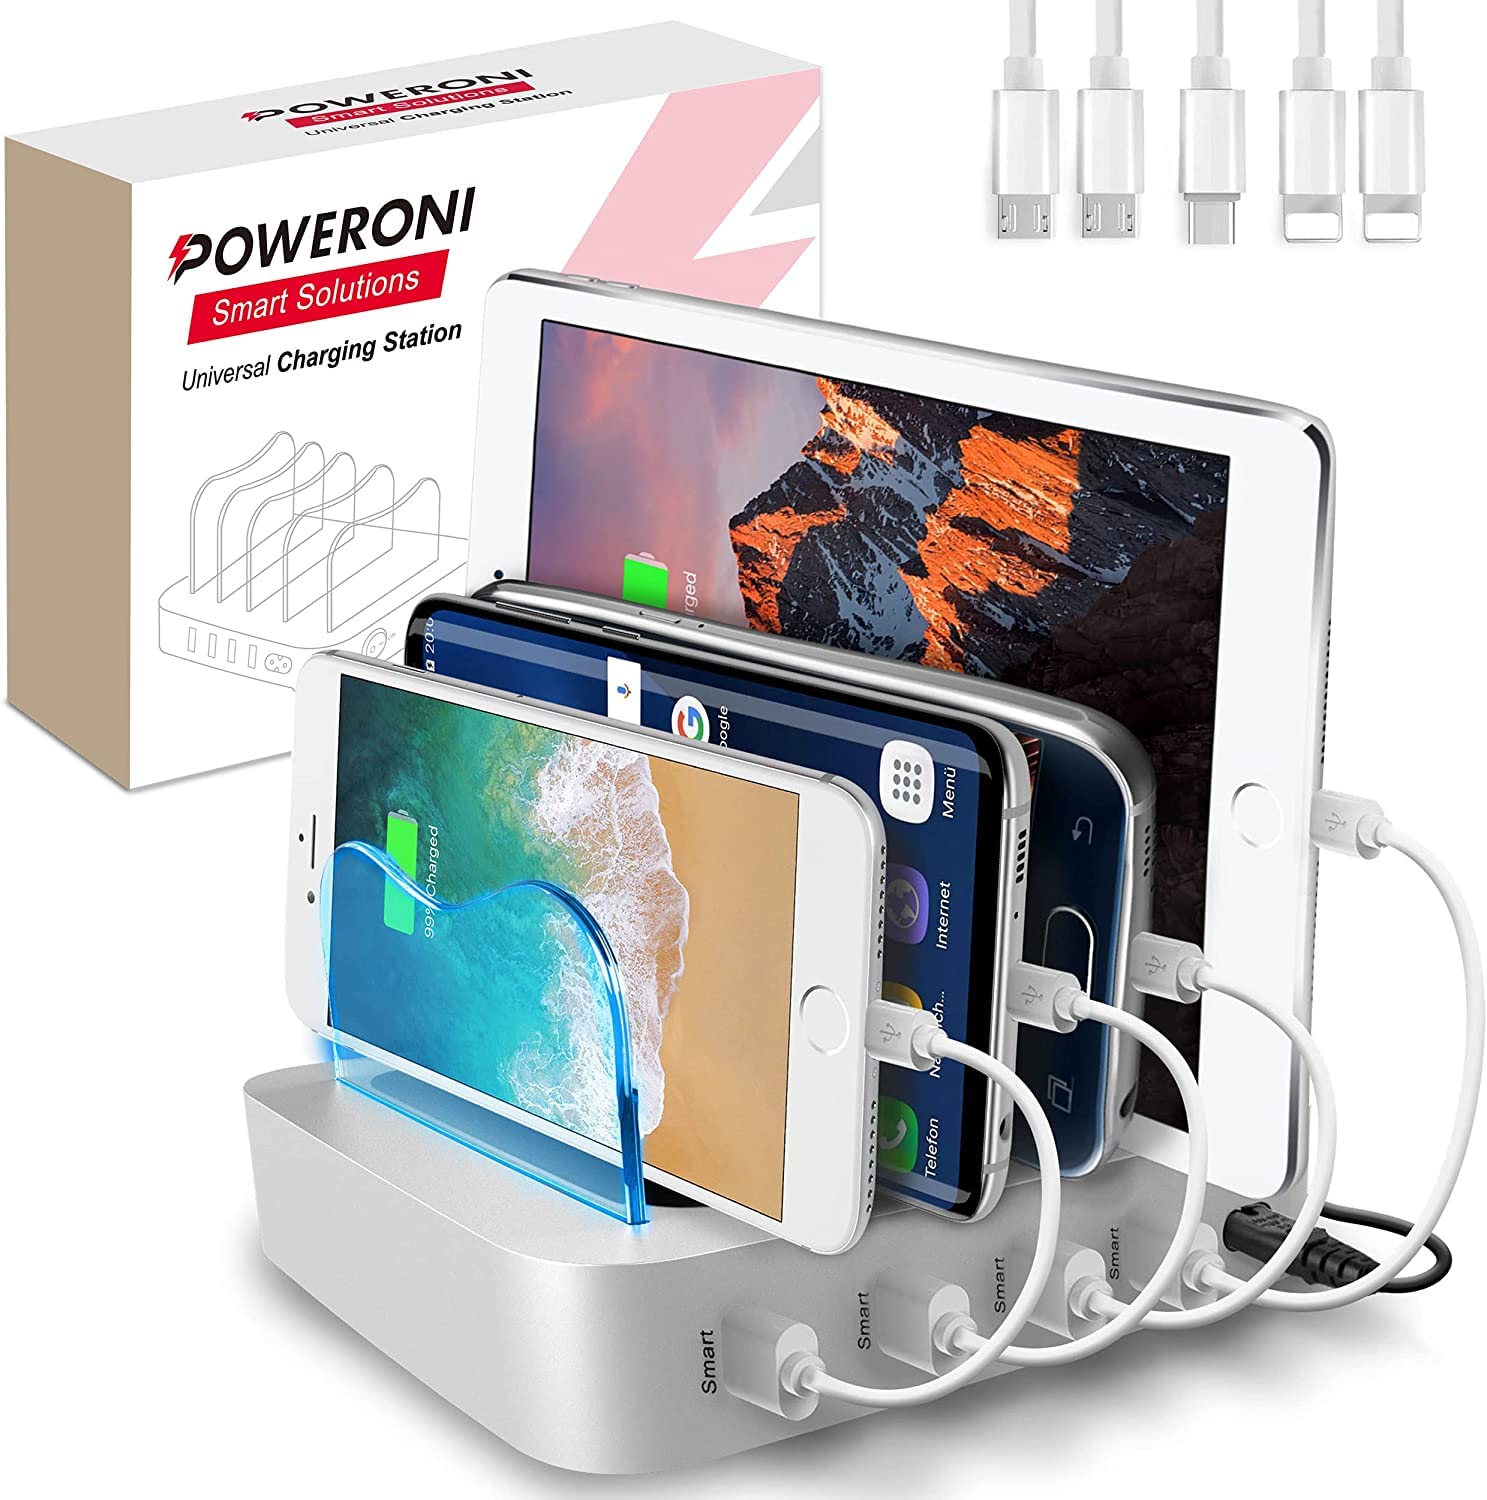 Poweroni USB Charging Dock - 4-Port - Fast Charging Station for Multiple Devices Apple - Multi Device Charger Station - Compatible with Apple iPad iPhone and Android Cell Phone and Tablet  - Good